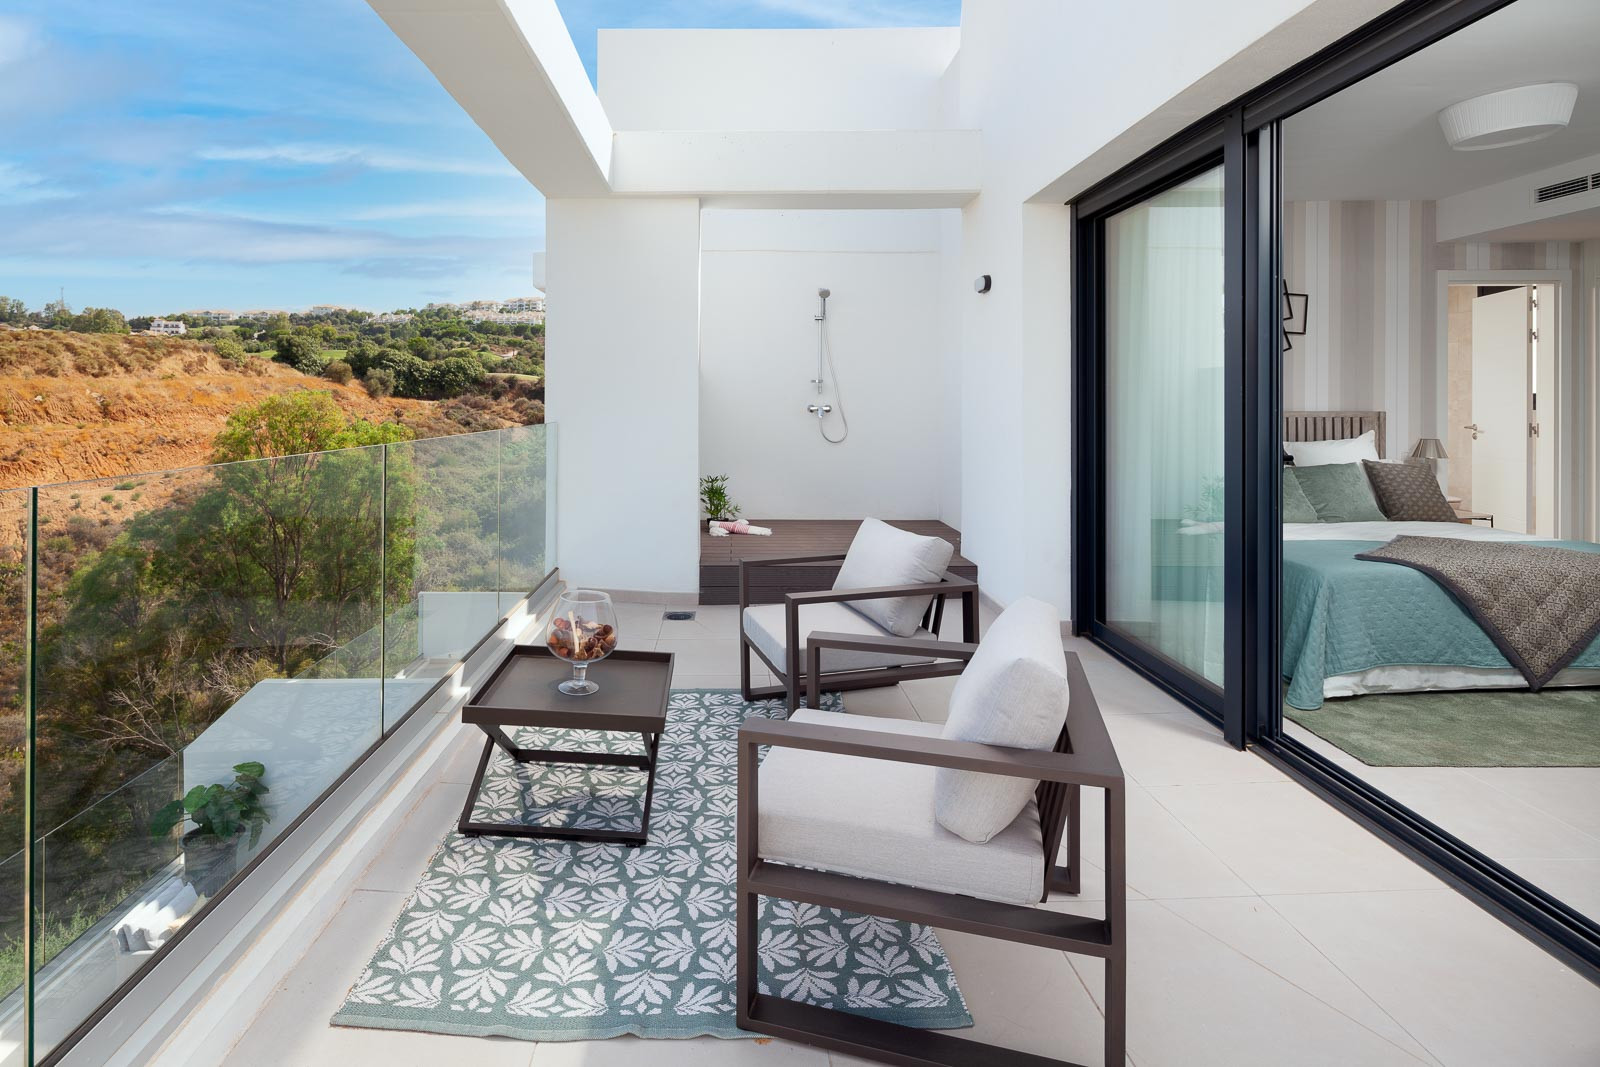 New development of 54 contemporary apartments within golf resort in Mijas Costa